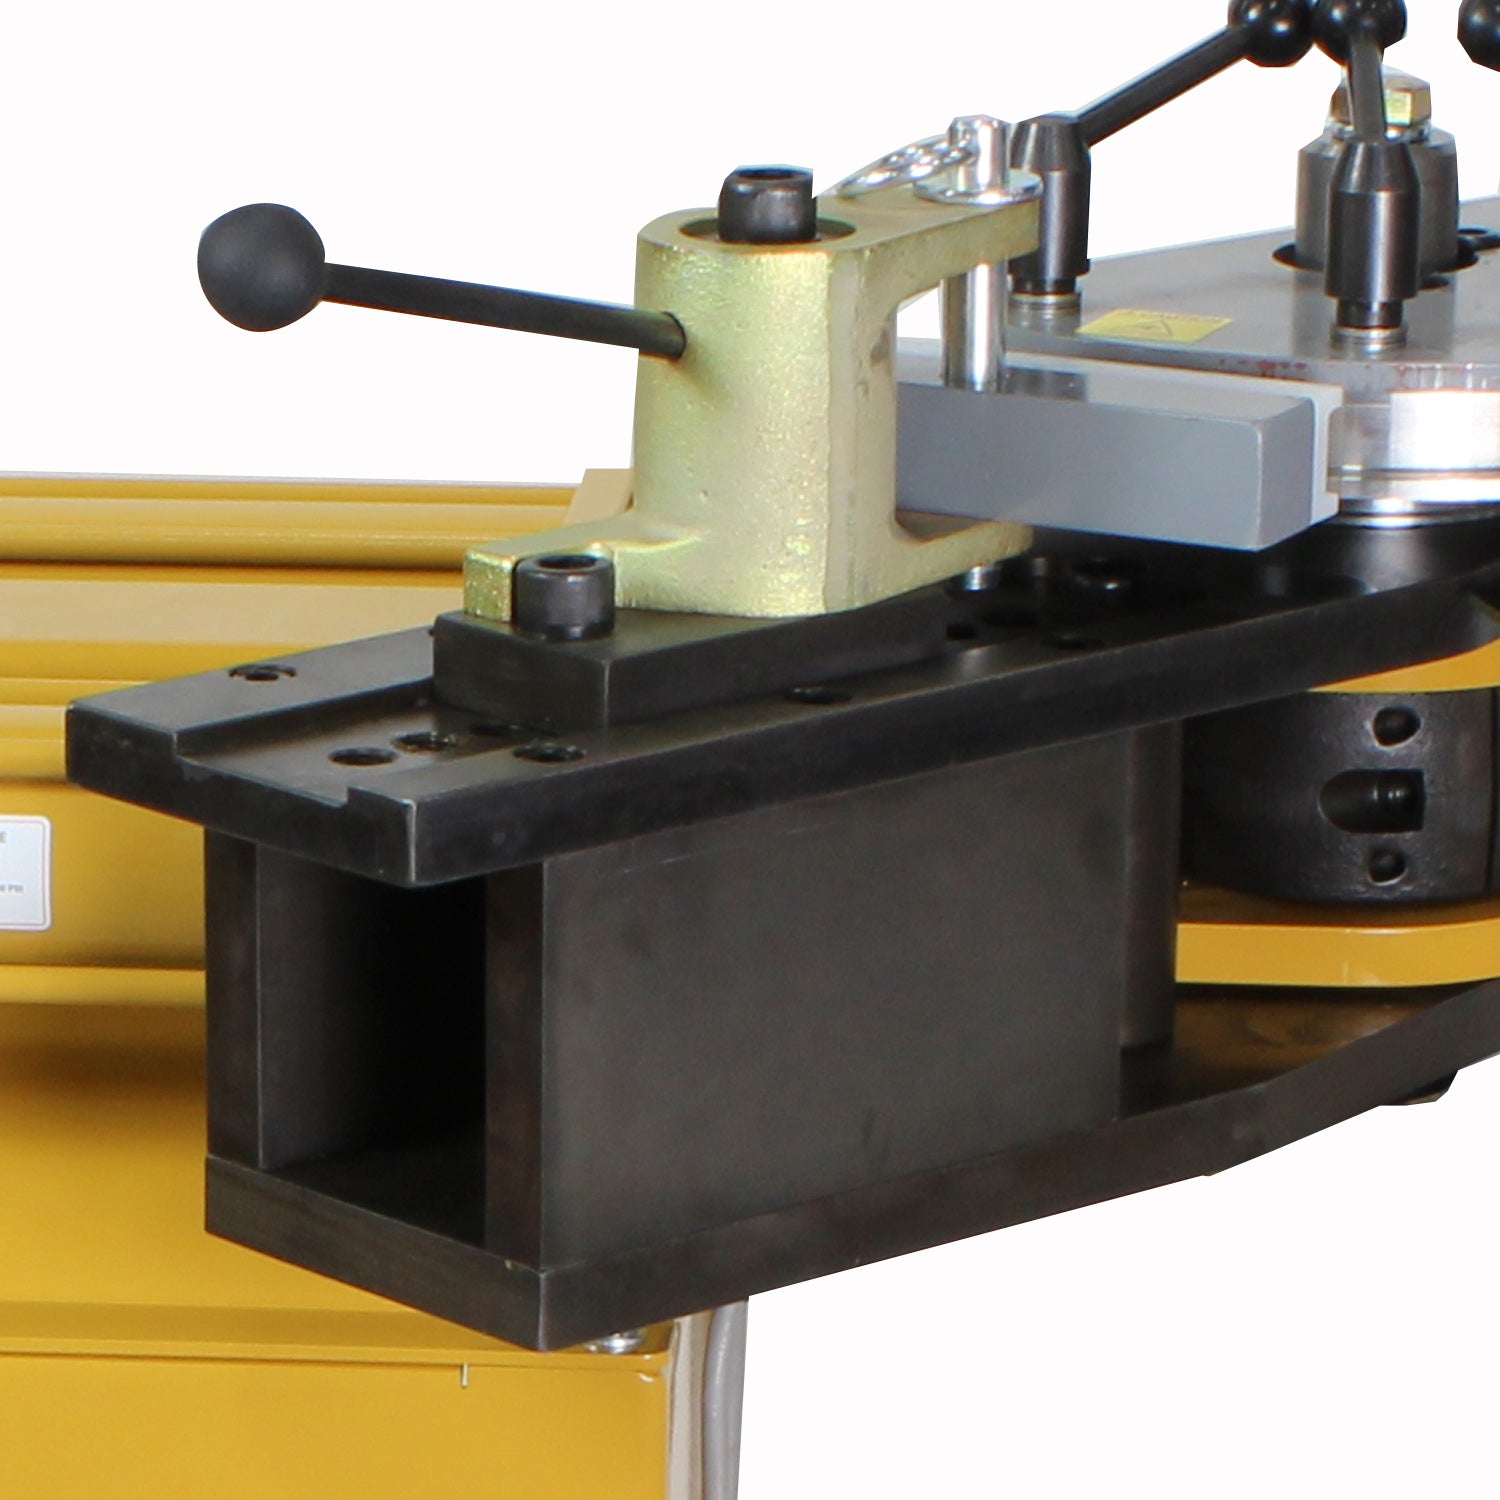 Baileigh RDB-150-AS 110V Hydraulic Rotary Draw Tube & Pipe Bender 2" Schedule 40 Pipe Capacity, with Auto Stop